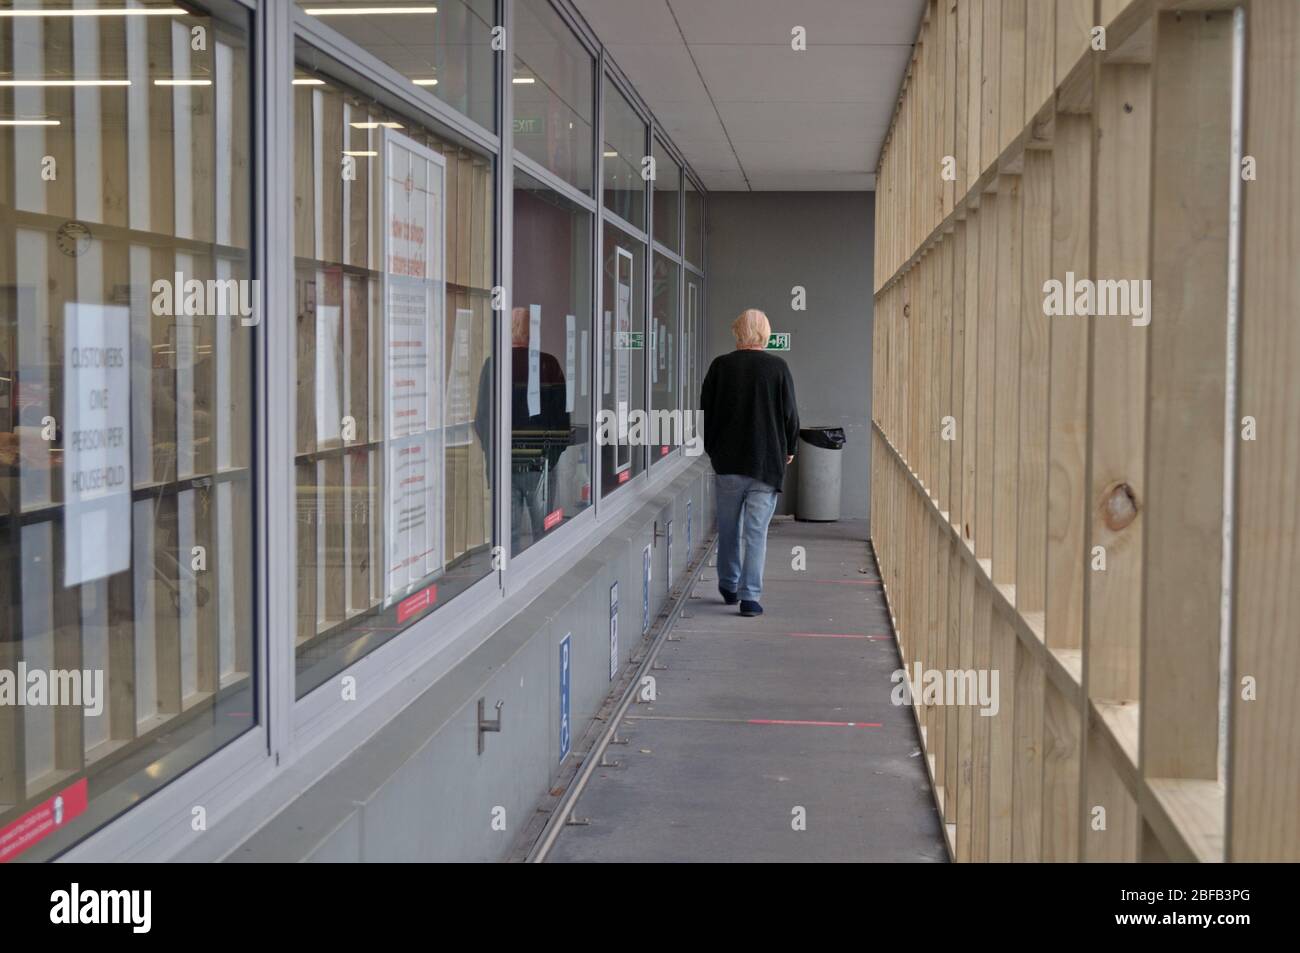 GREYMOUTH, NEW ZEALAND, APRIL 11, 2020: A customer walks through a temporary entrance to create social distancing at a supermarket during the Covid 19 lockdown in New Zealand, April 11,  2020. The red strips on the floor are spaced two metres apart. Stock Photo